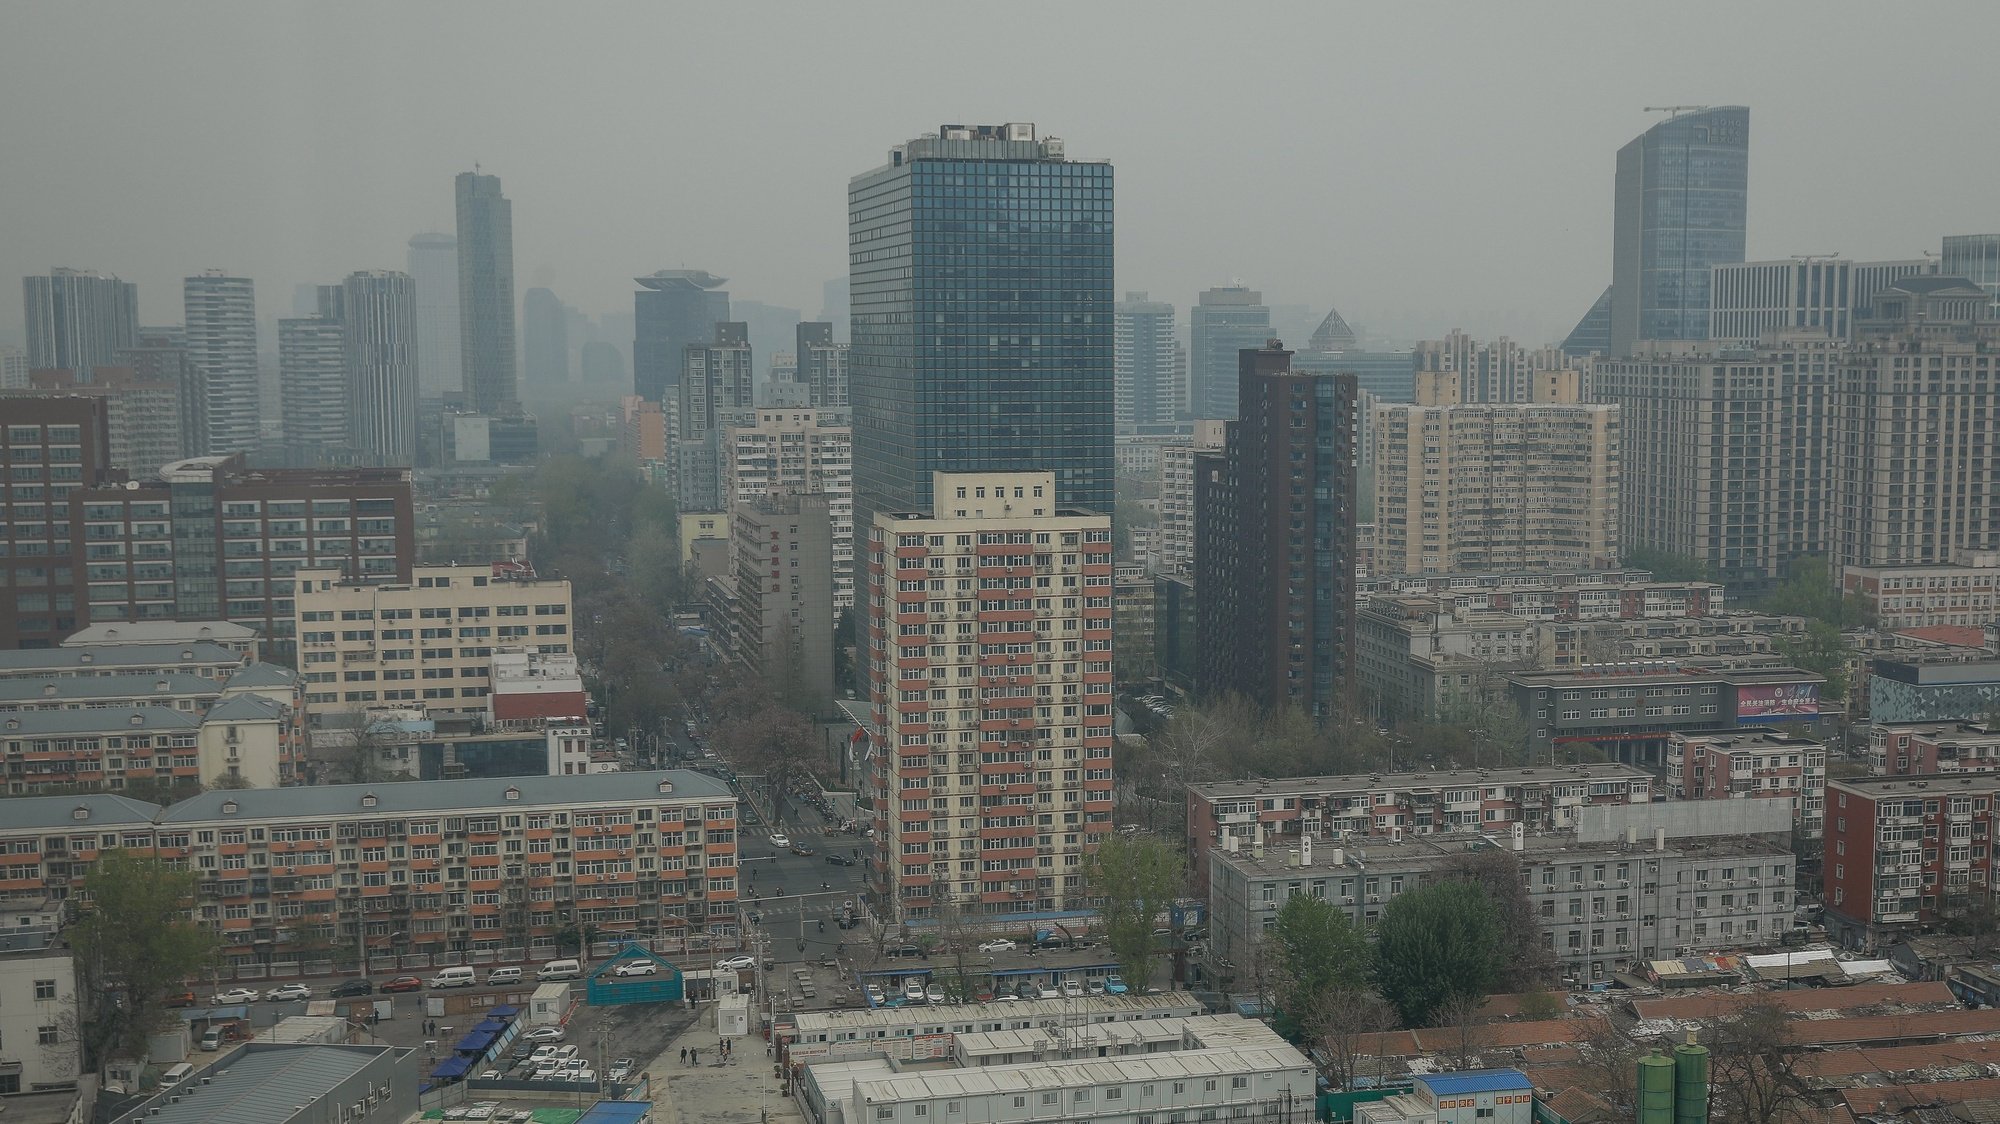 epa09884222 A view of apartments and office buildings in Beijing, China, 11 April 2022. China&#039;s consumer price index (CPI), a gauge for inflation, rose 1.5 percent year on year in March, up from 0.9 percent growth in February. The increase is driven by the rising cost of global commodities as well as epidemic outbreaks, the National Bureau of Statistics (NBS) said.  EPA/MARK R. CRISTINO